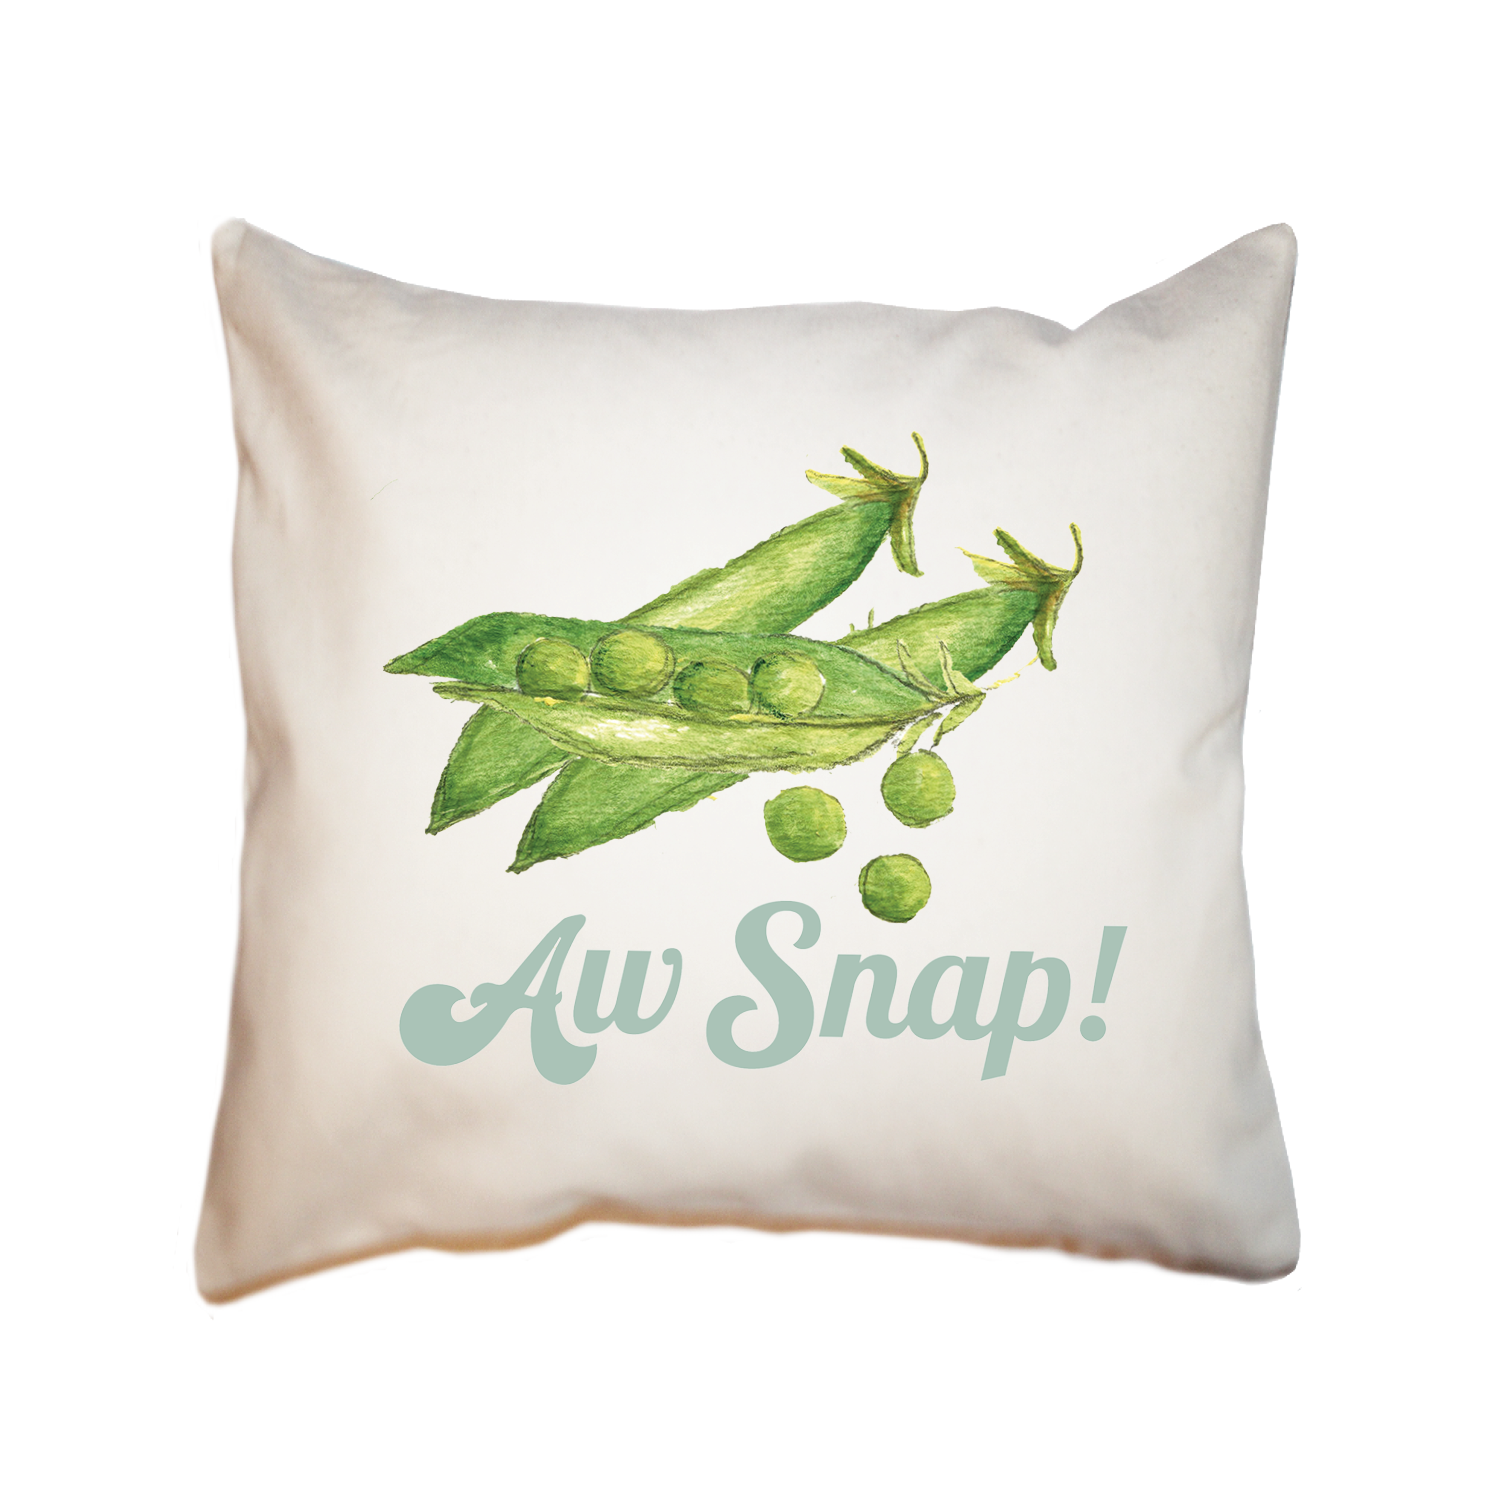 aw snap square pillow